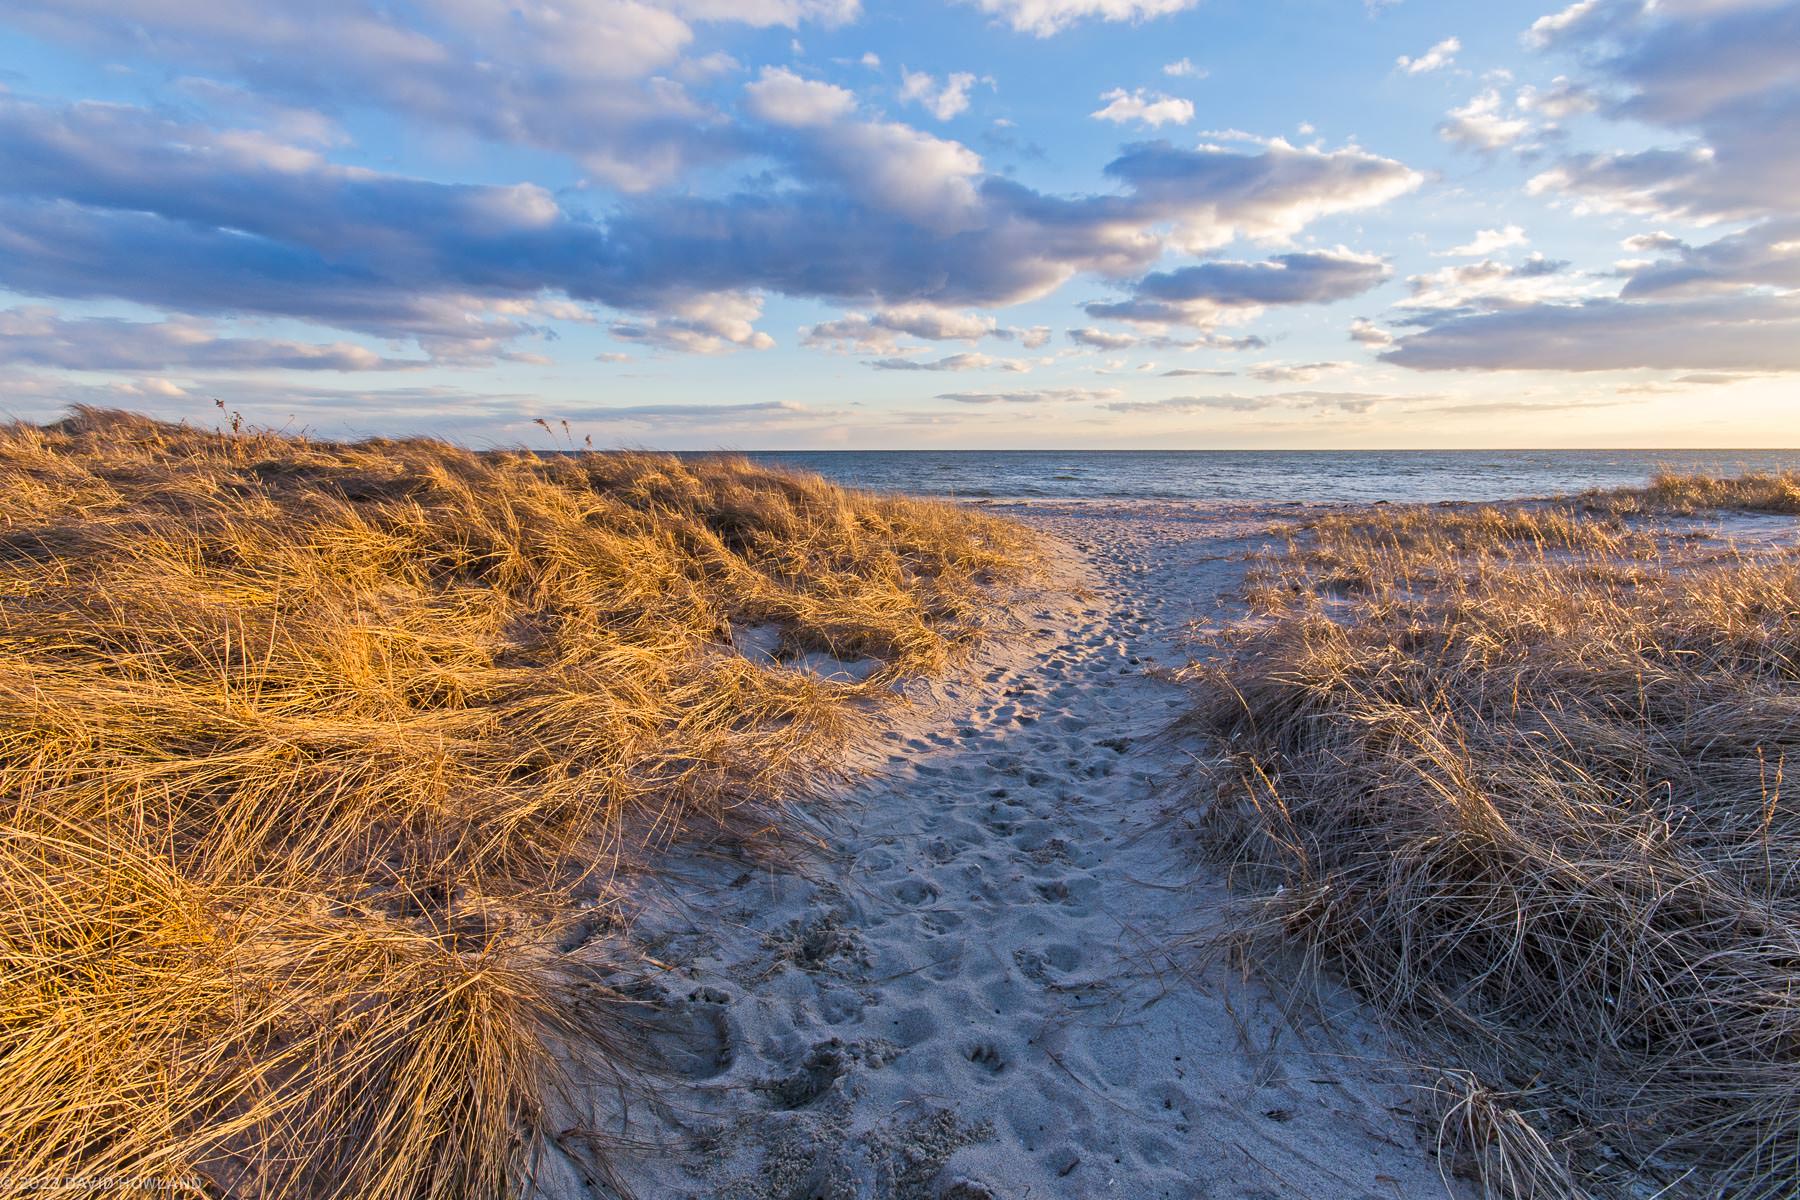 A photo of clouds in the sky over a dune grass covered beach at sunset.